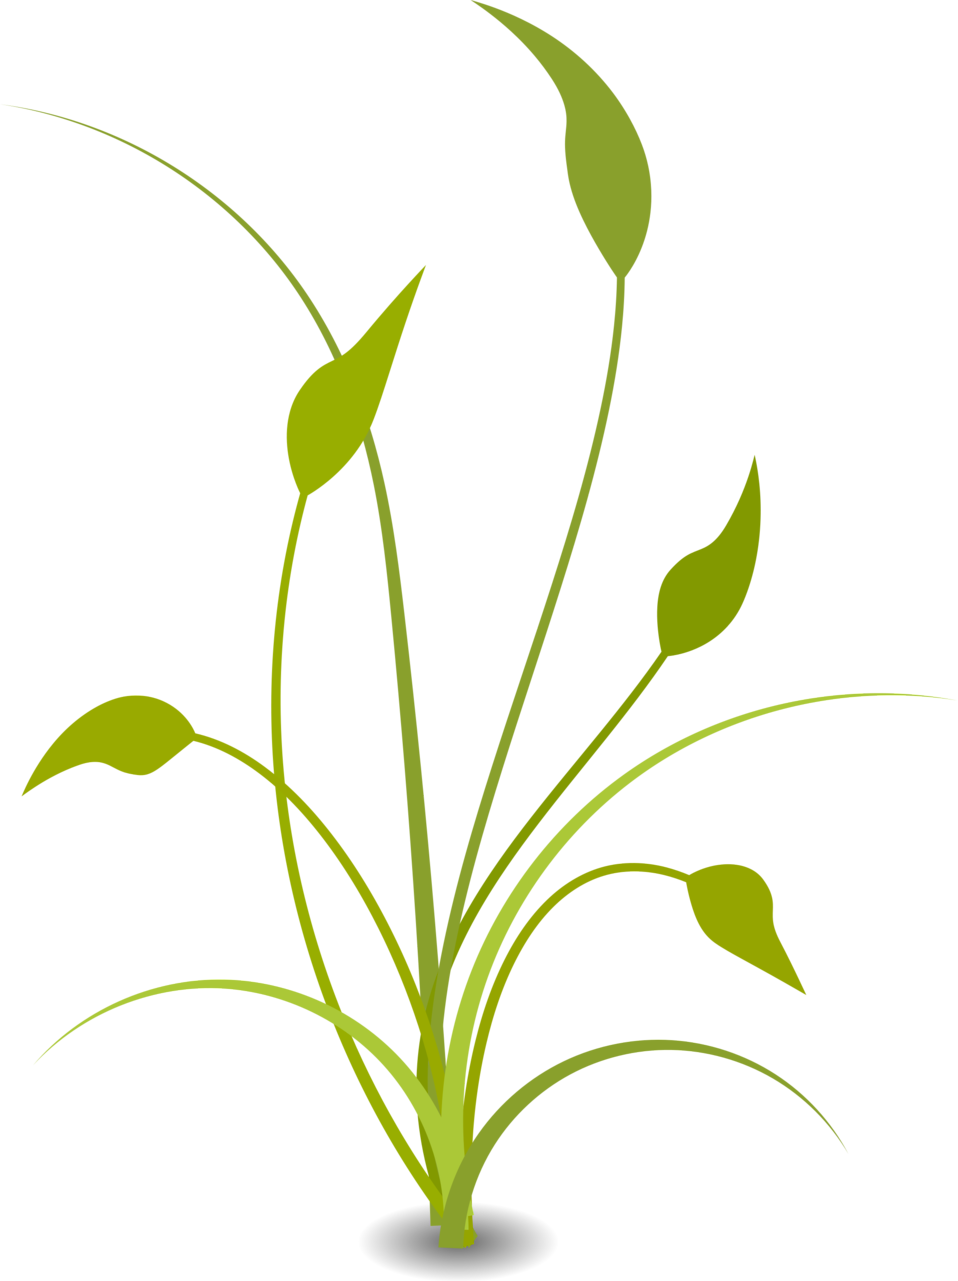 File:Arrowhead plant (PSF).png - Wikimedia Commons